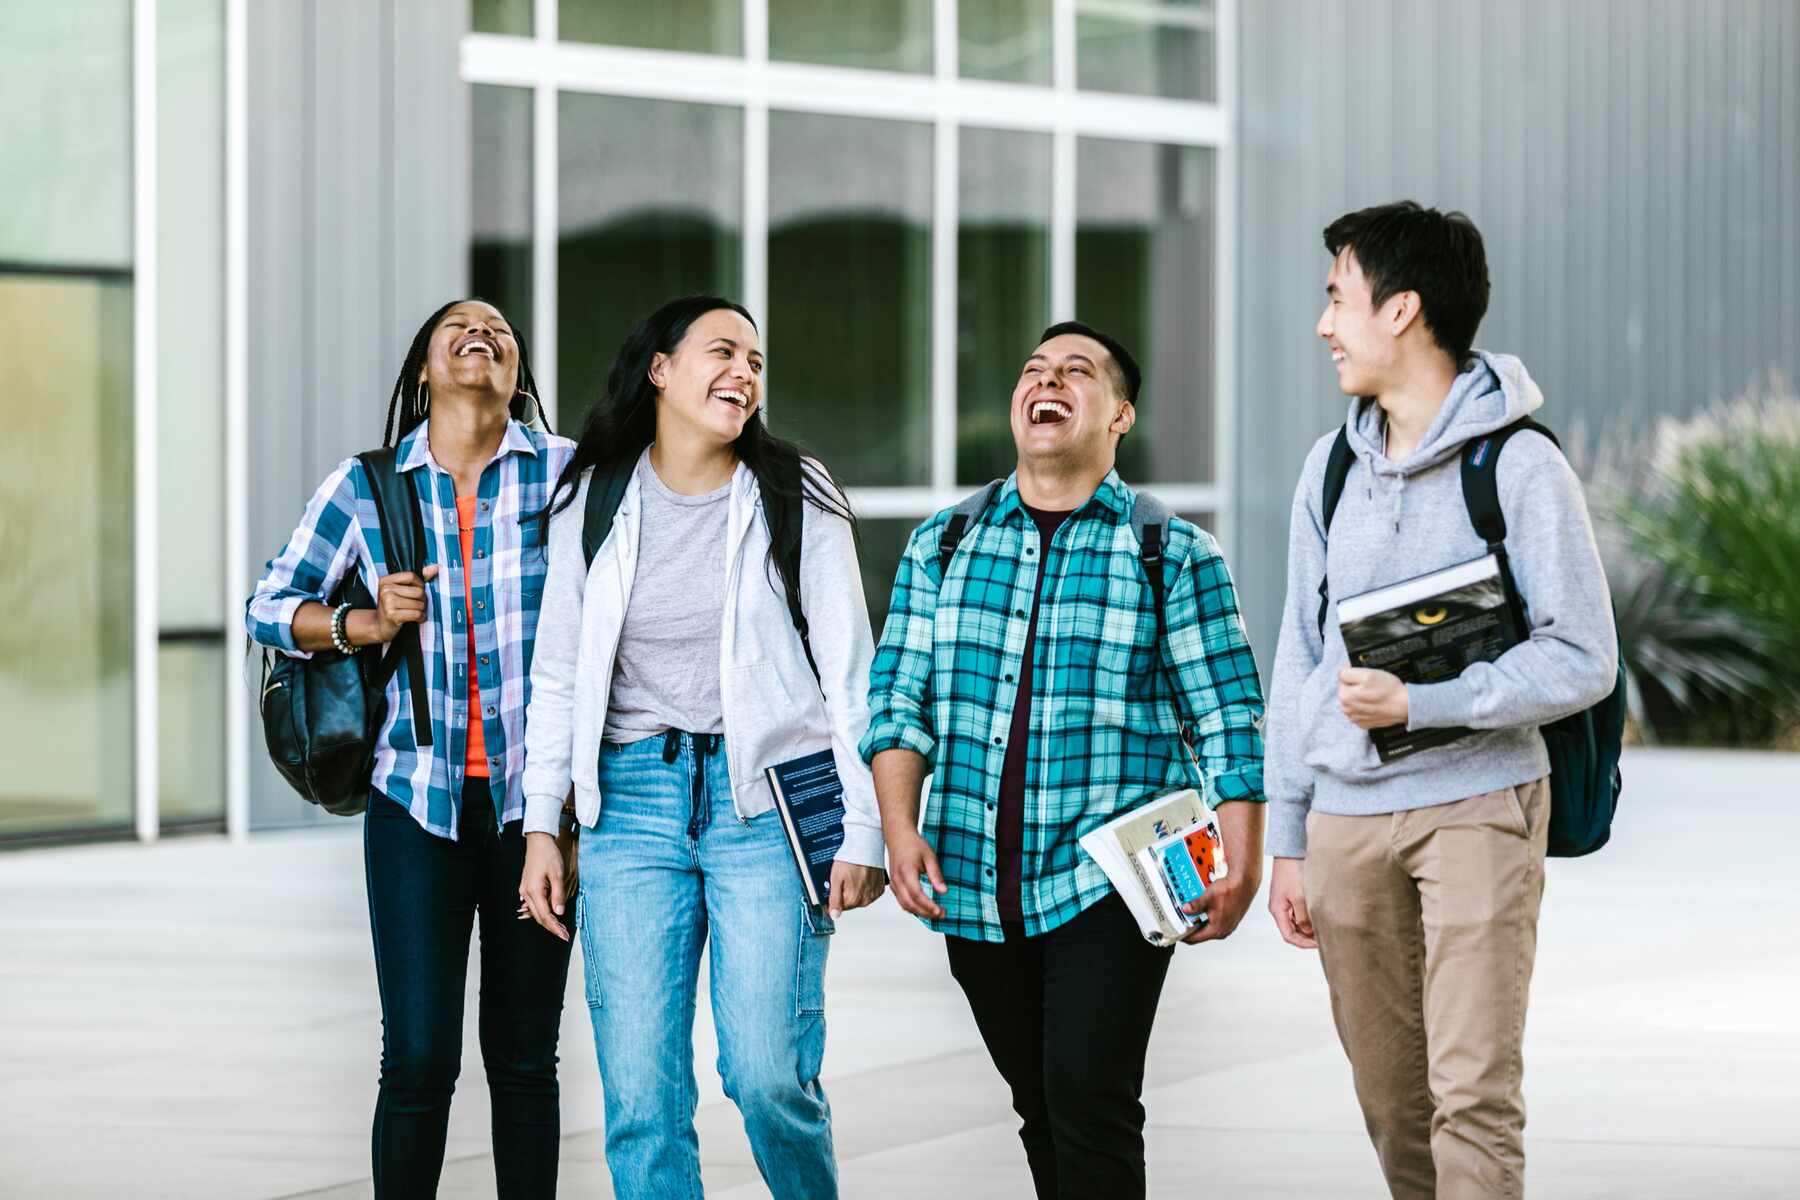 Group of students laughing and walking together on school grounds